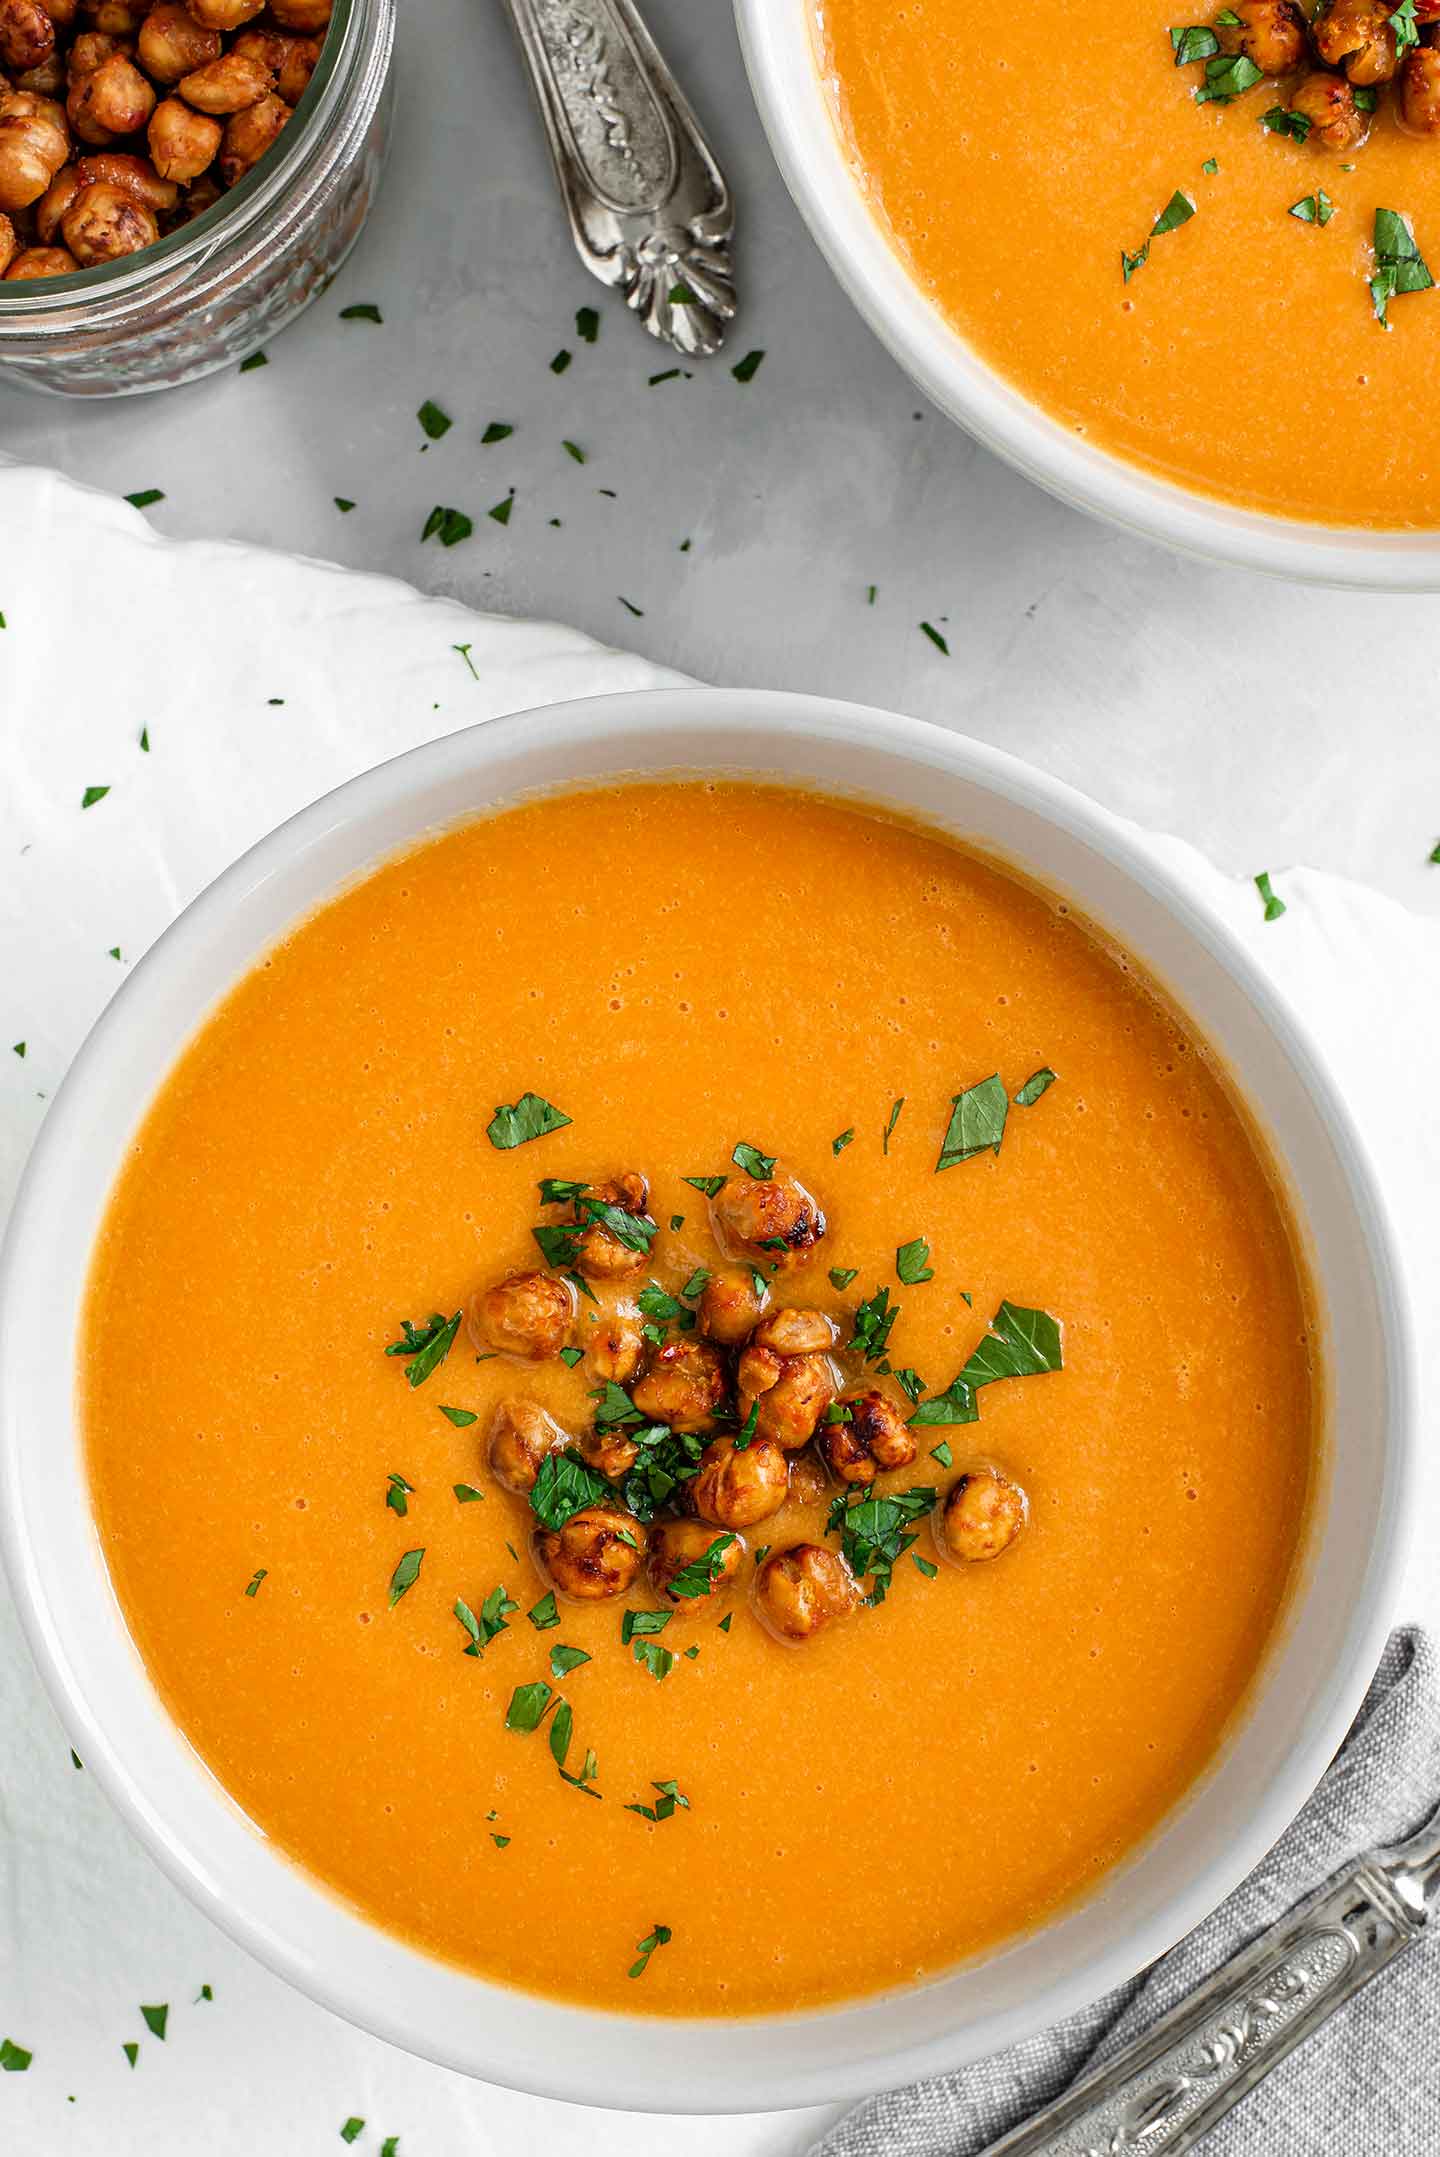 https://tastythriftytimely.com/wp-content/uploads/2021/09/Sweet-Carrot-Ginger-Soup-Simple-And-Thrifty-5.jpg